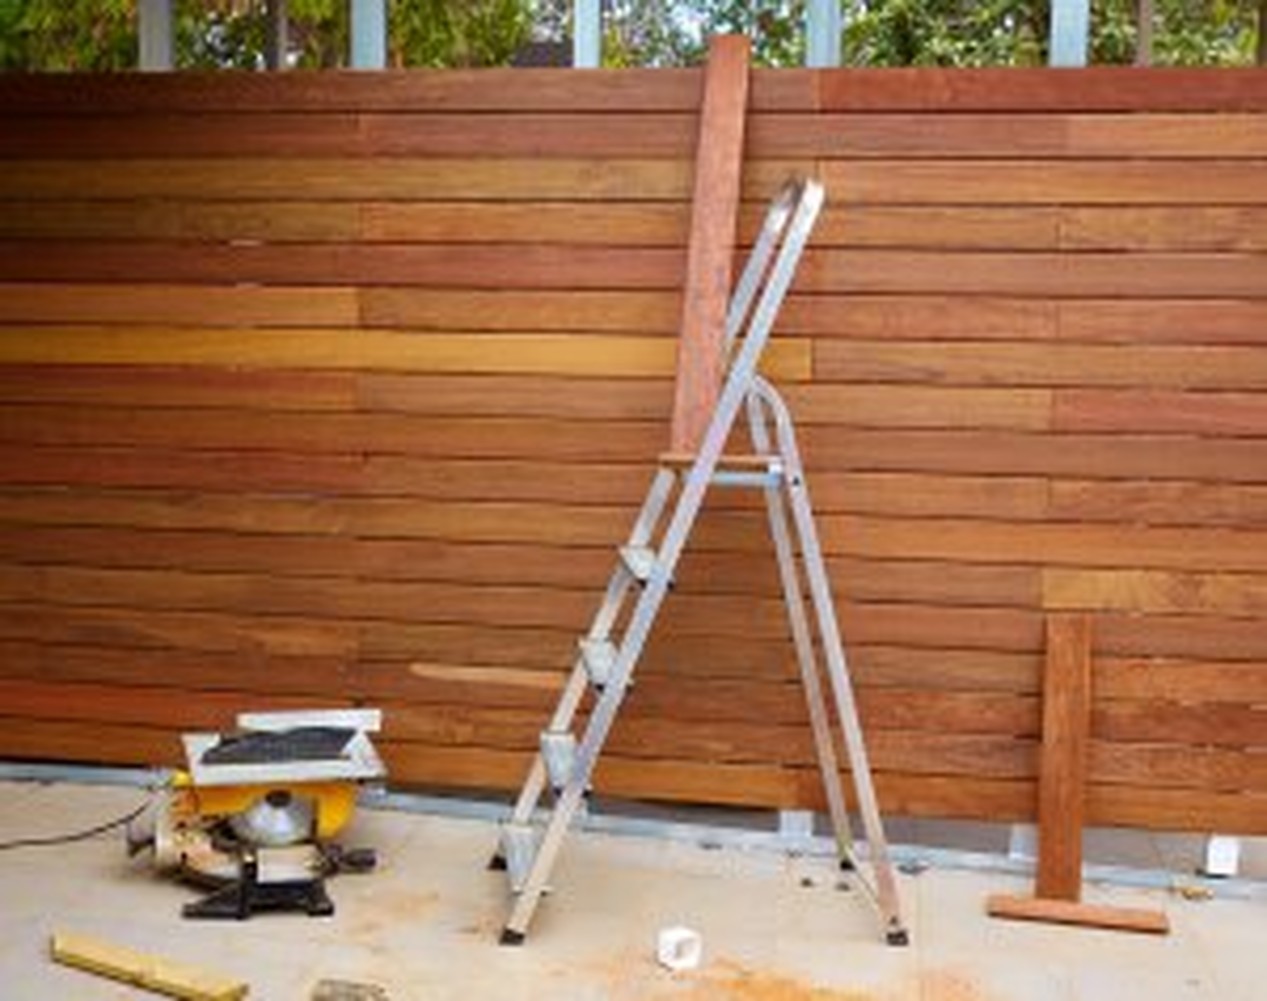 WHAT YOU SHOULD KNOW BEFORE BEGINNING A FENCE INSTALLATION PROJECT